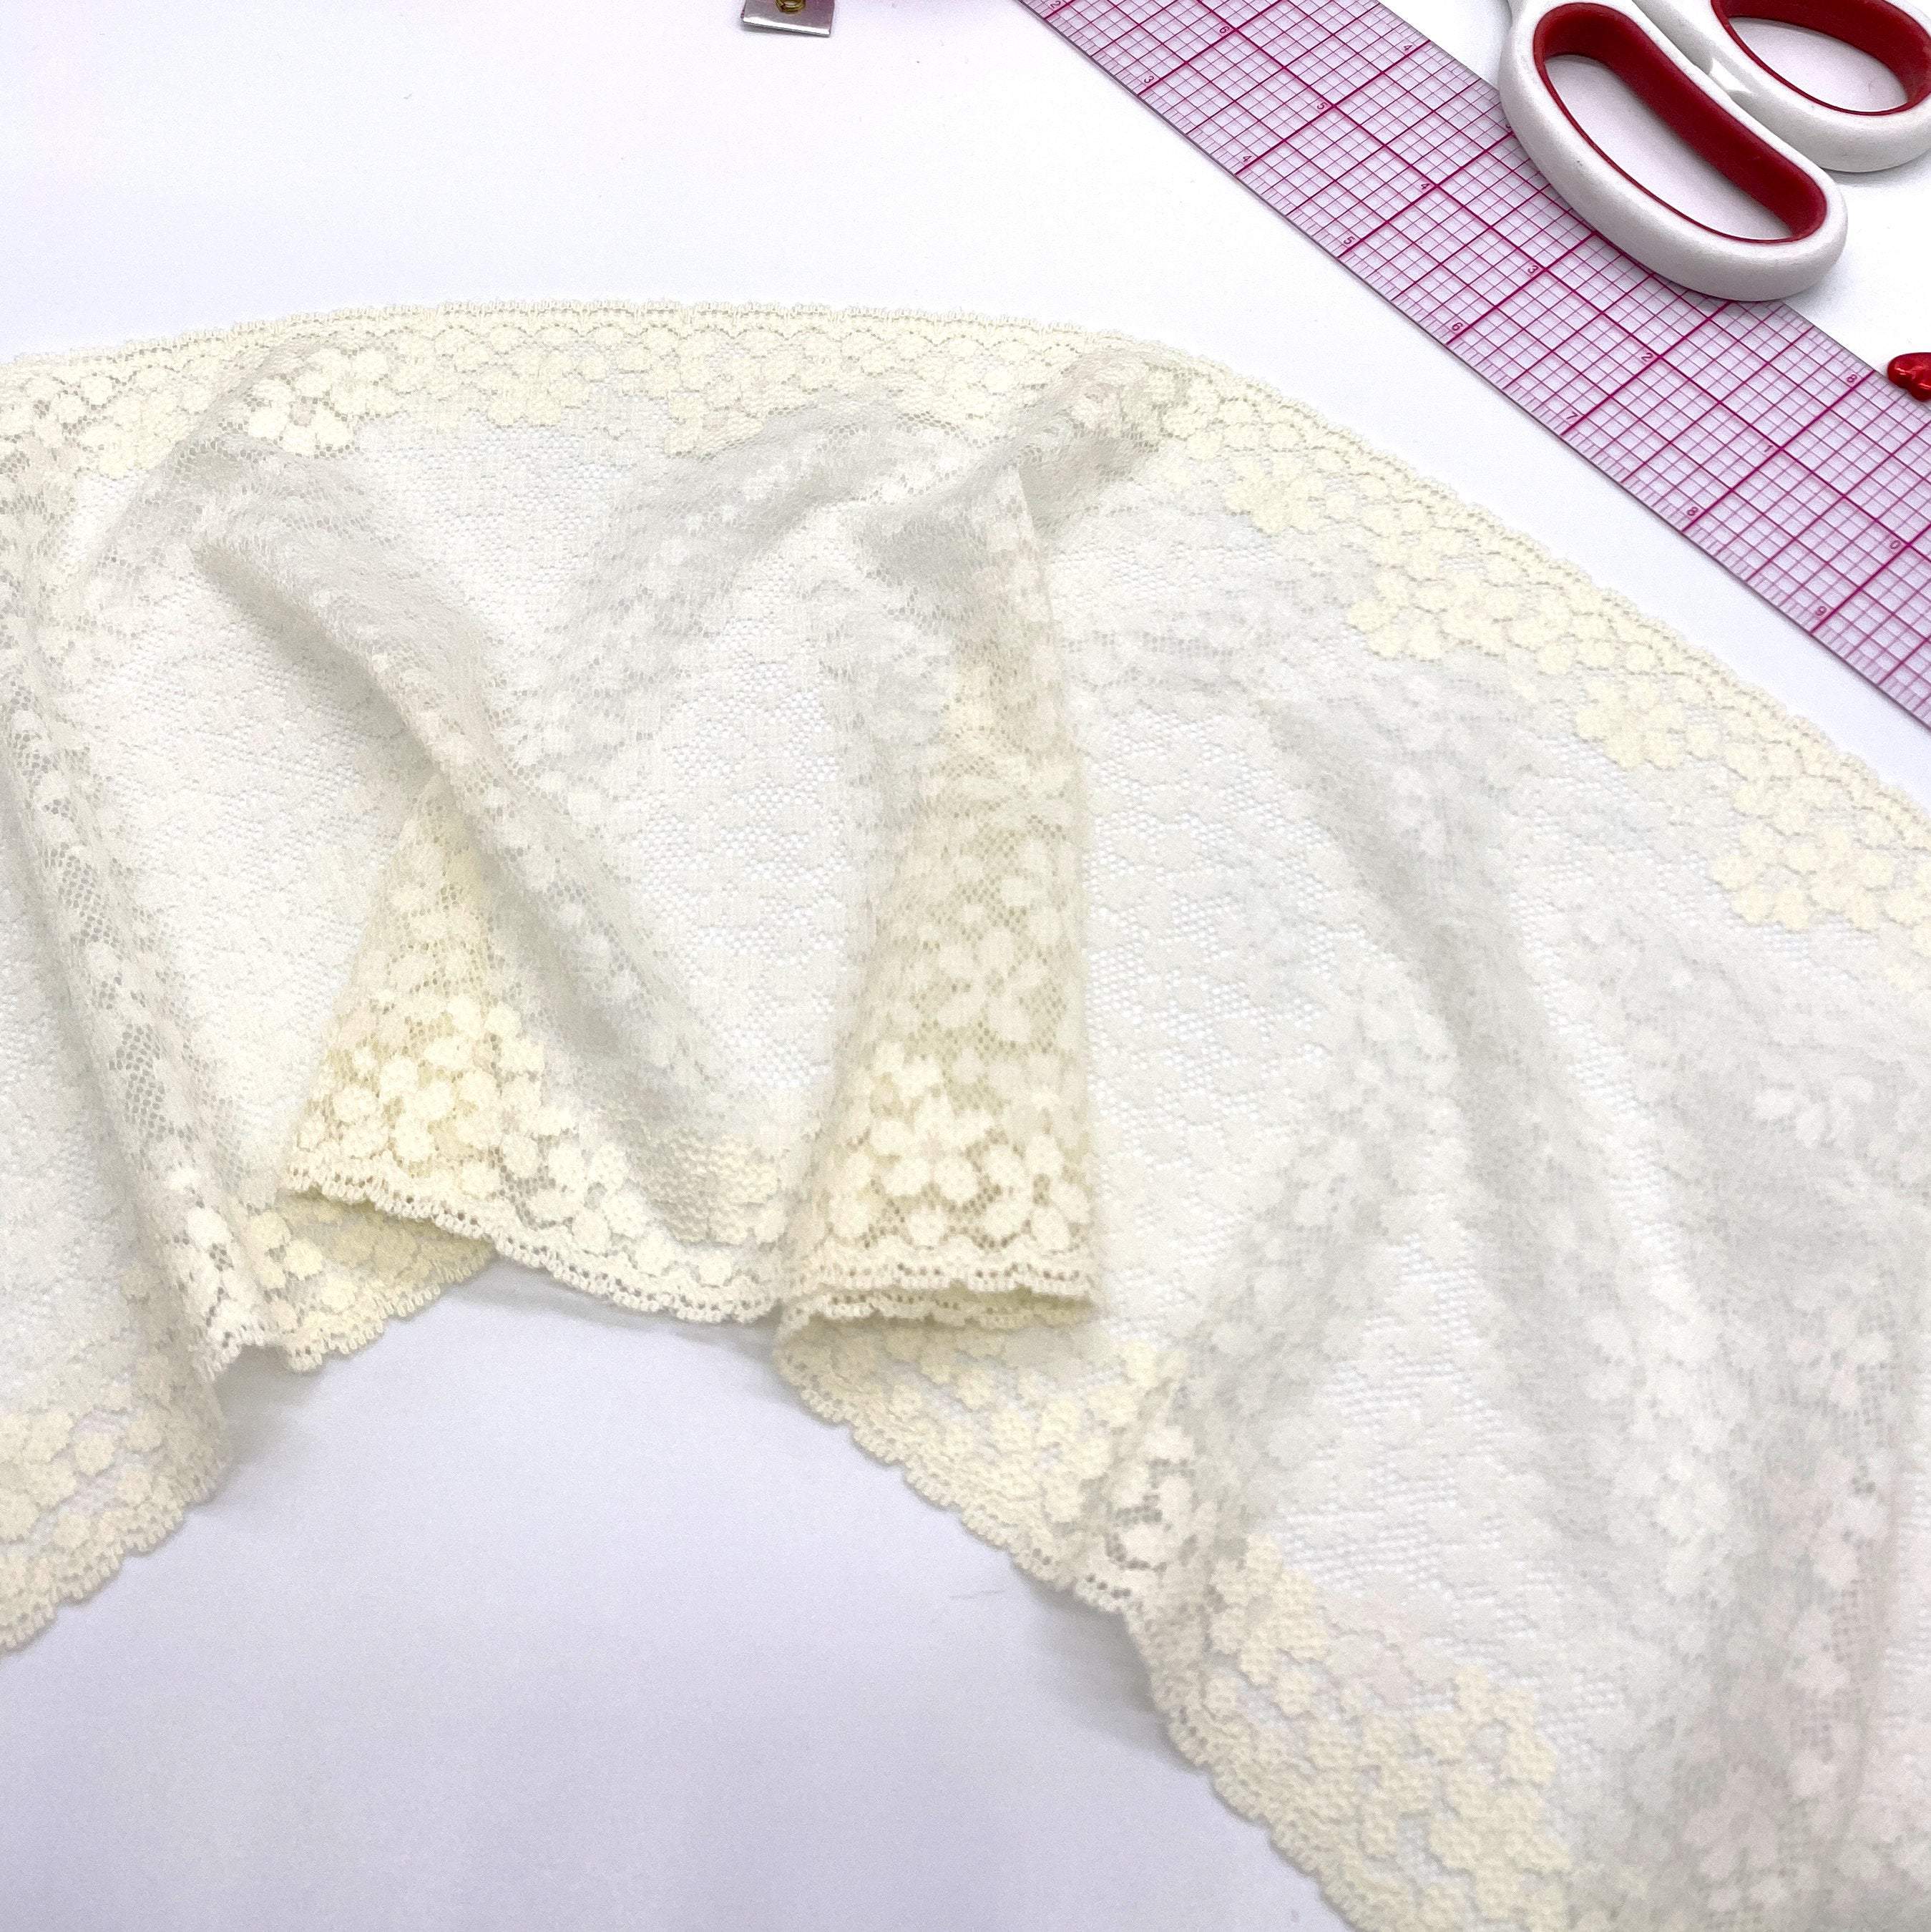 6 3/4" (17cm) Stretch Lace, Soft, High-Quality in White, Black or Ivory- by the 1 yard-Stitch Love Studio